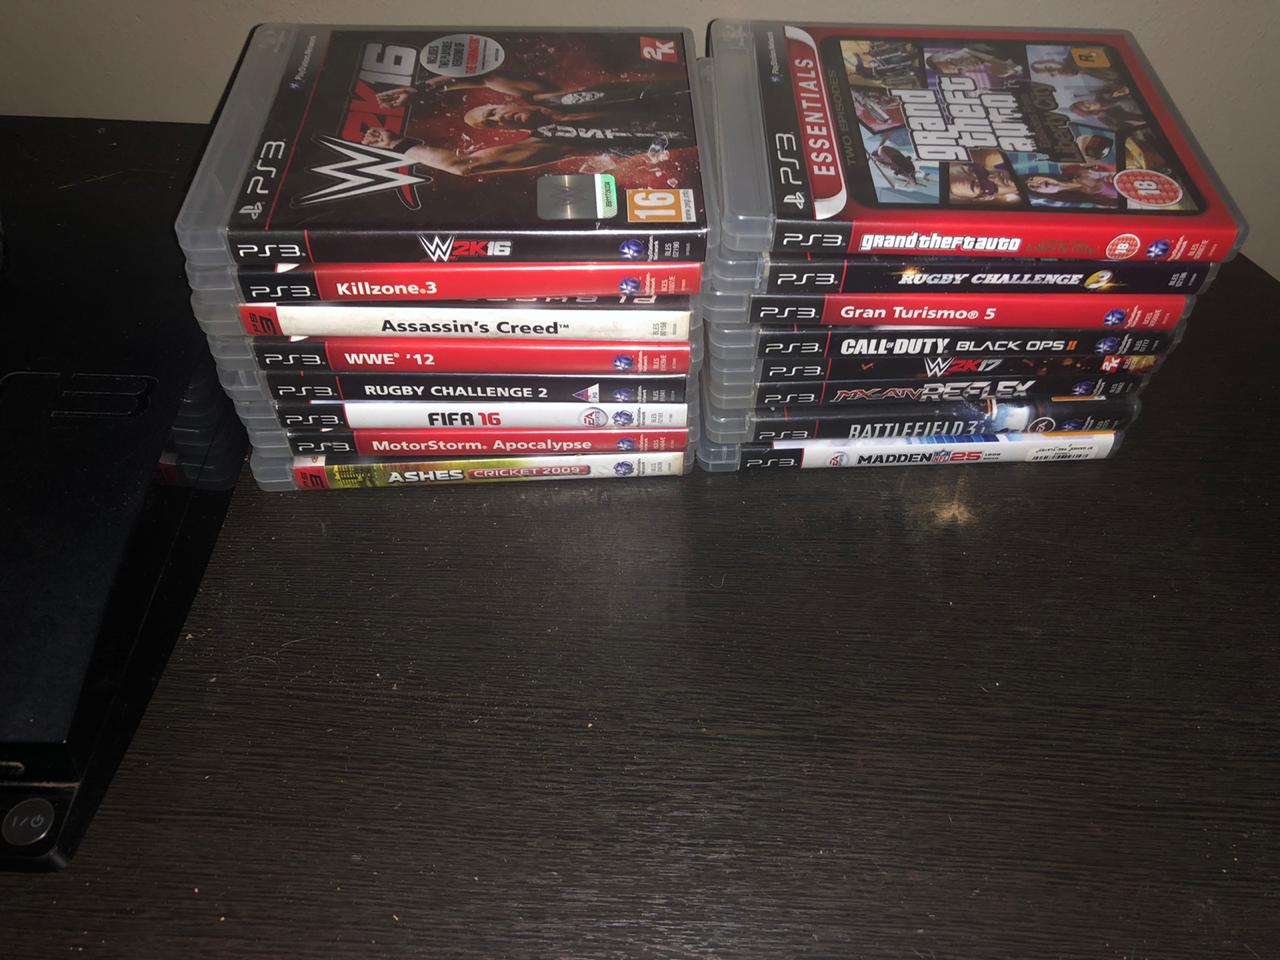 PS3 with all its gamesc+singstar and singstar mics